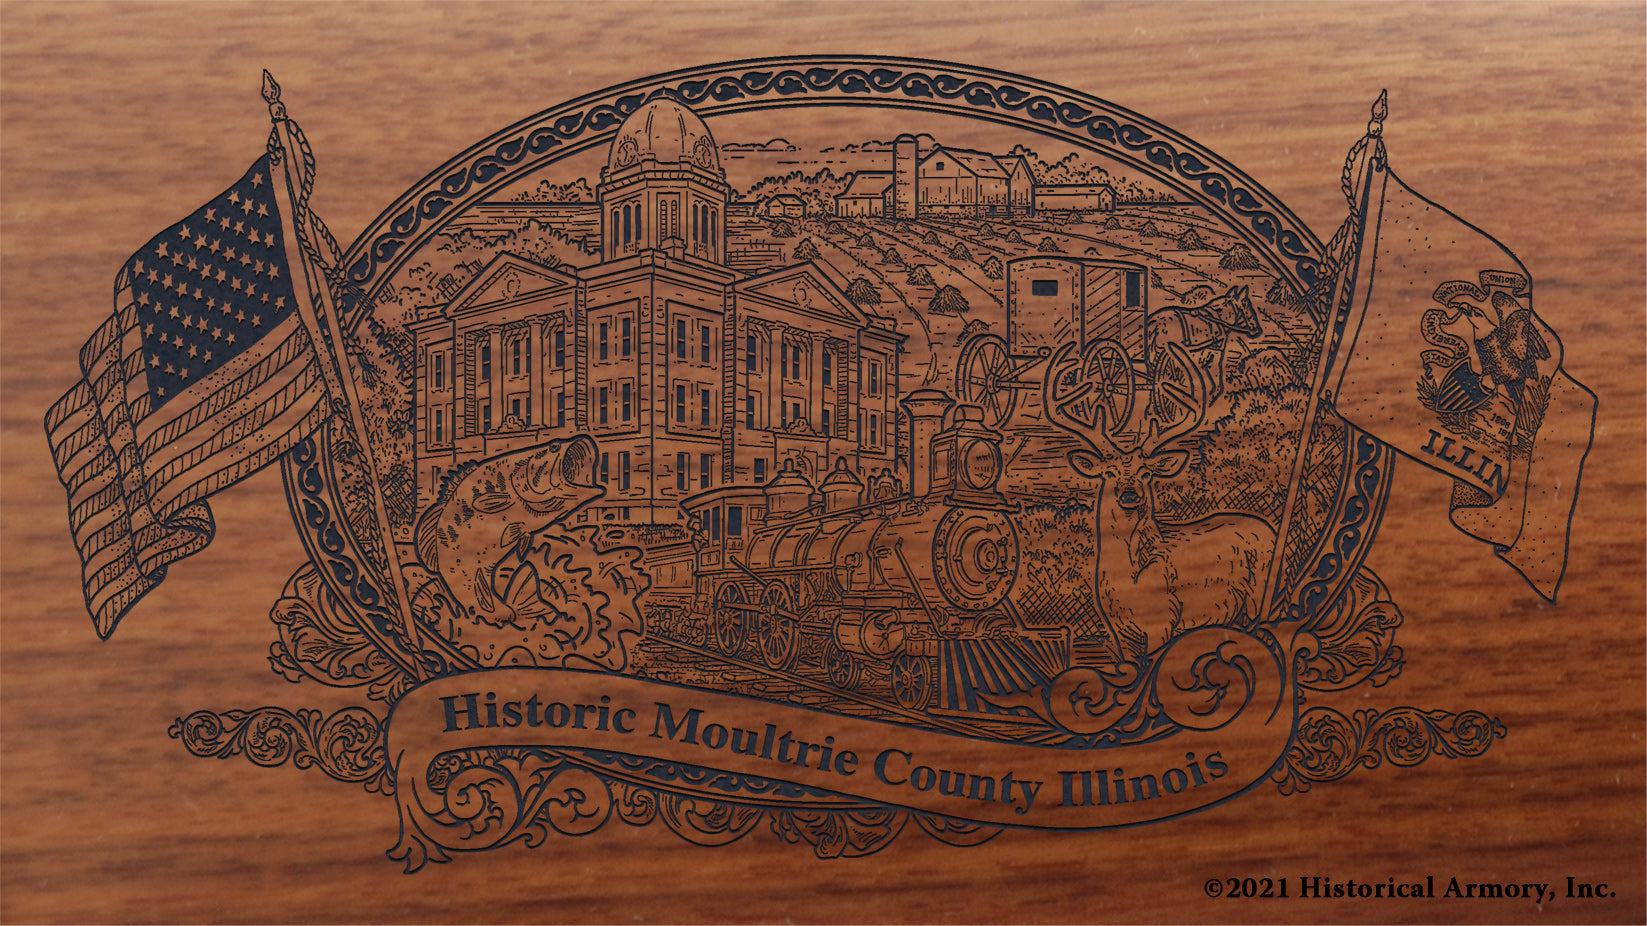 Engraved artwork | History of Moultrie County Illinois | Historical Armory